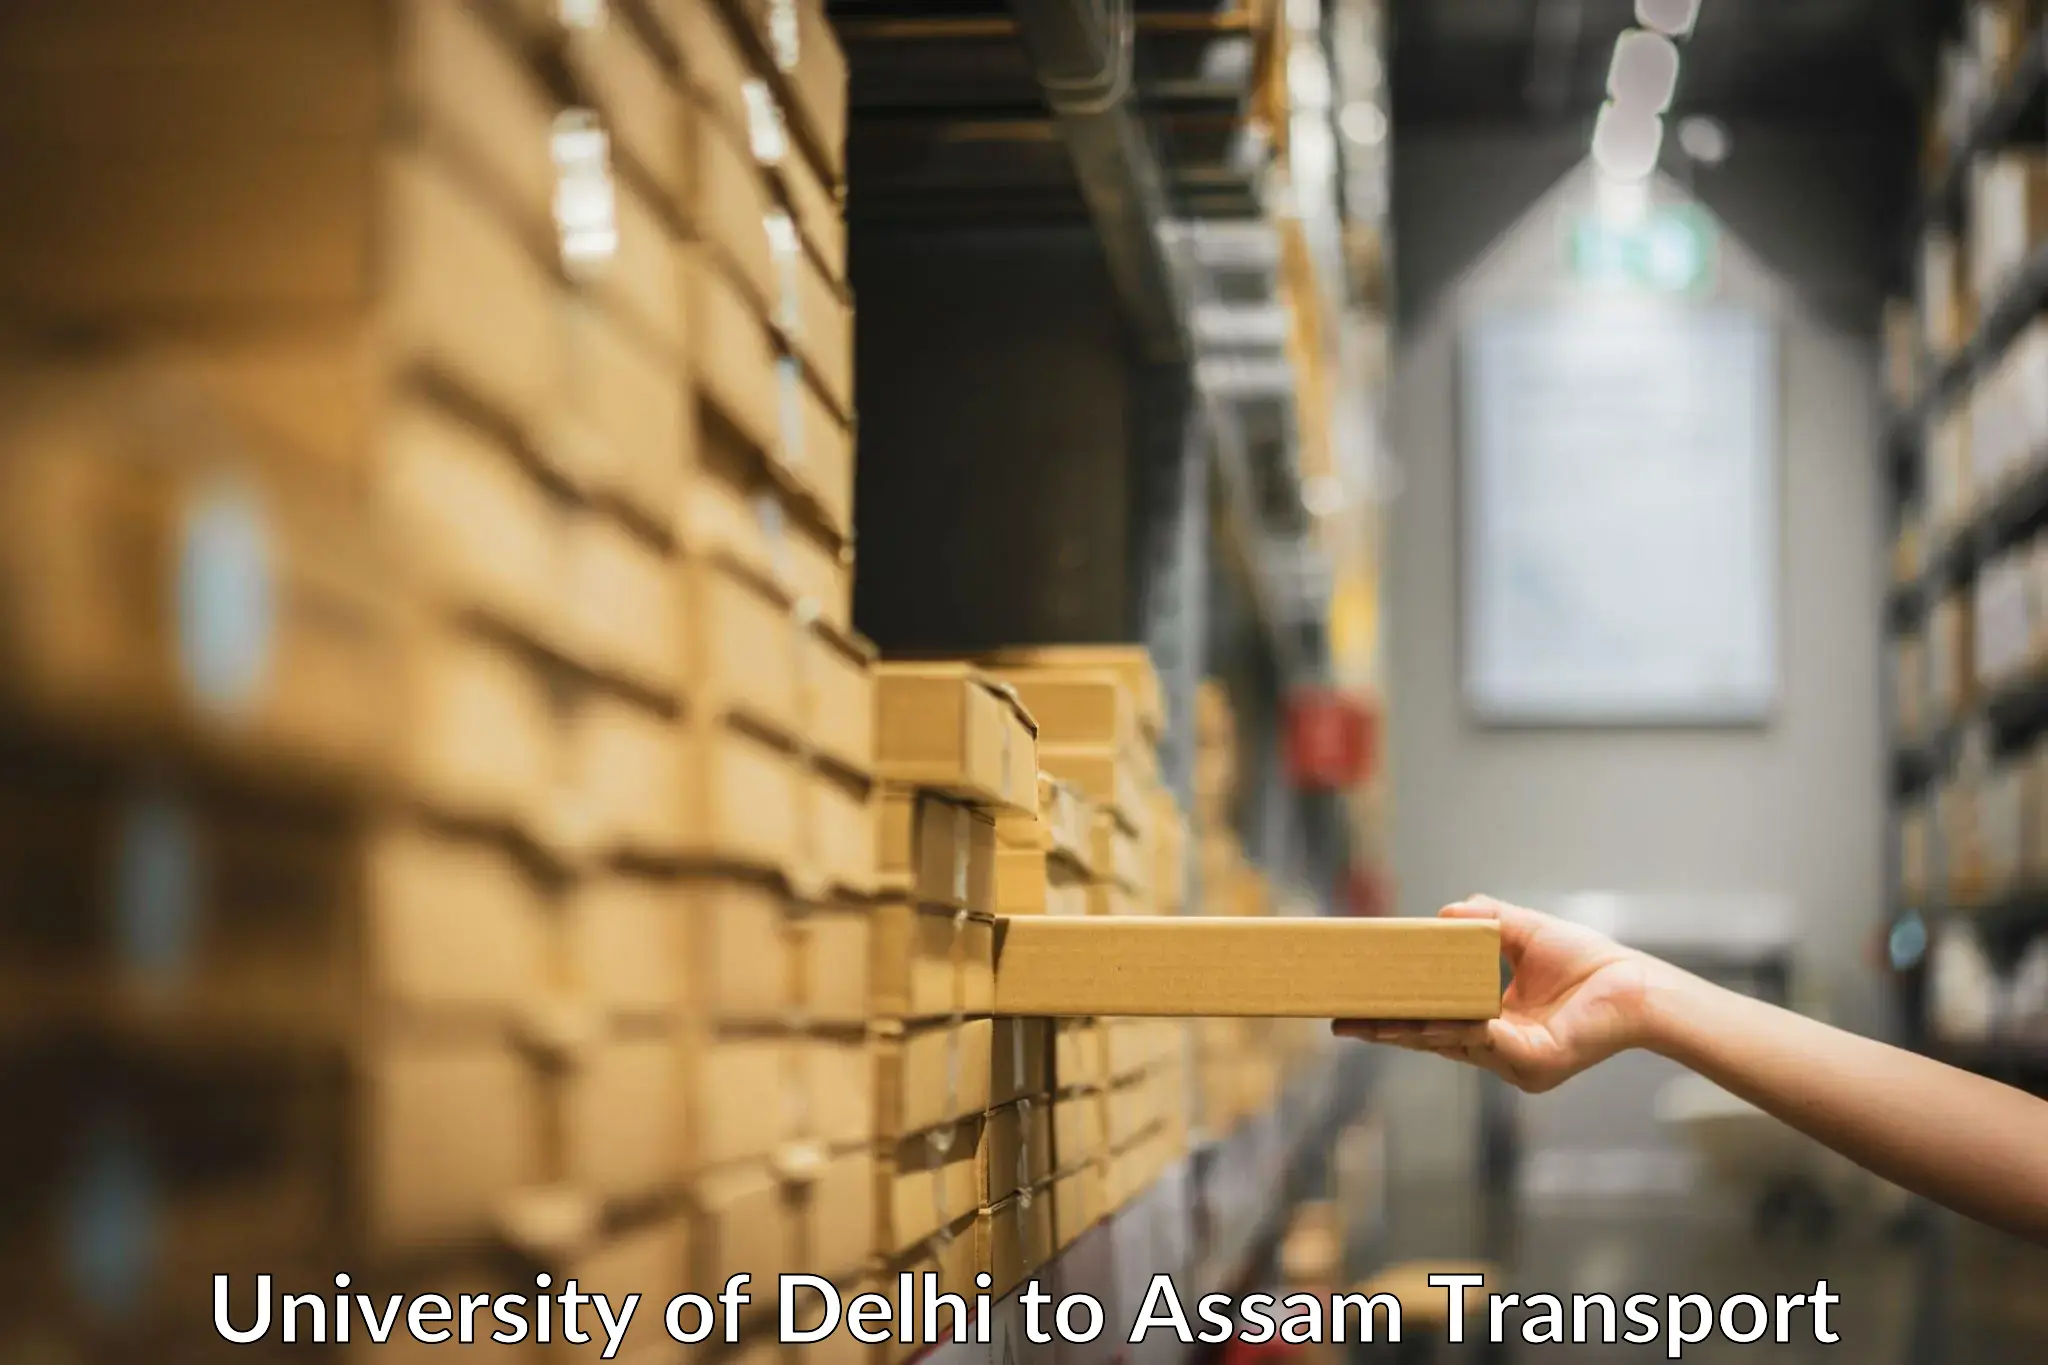 Goods delivery service University of Delhi to Lala Assam